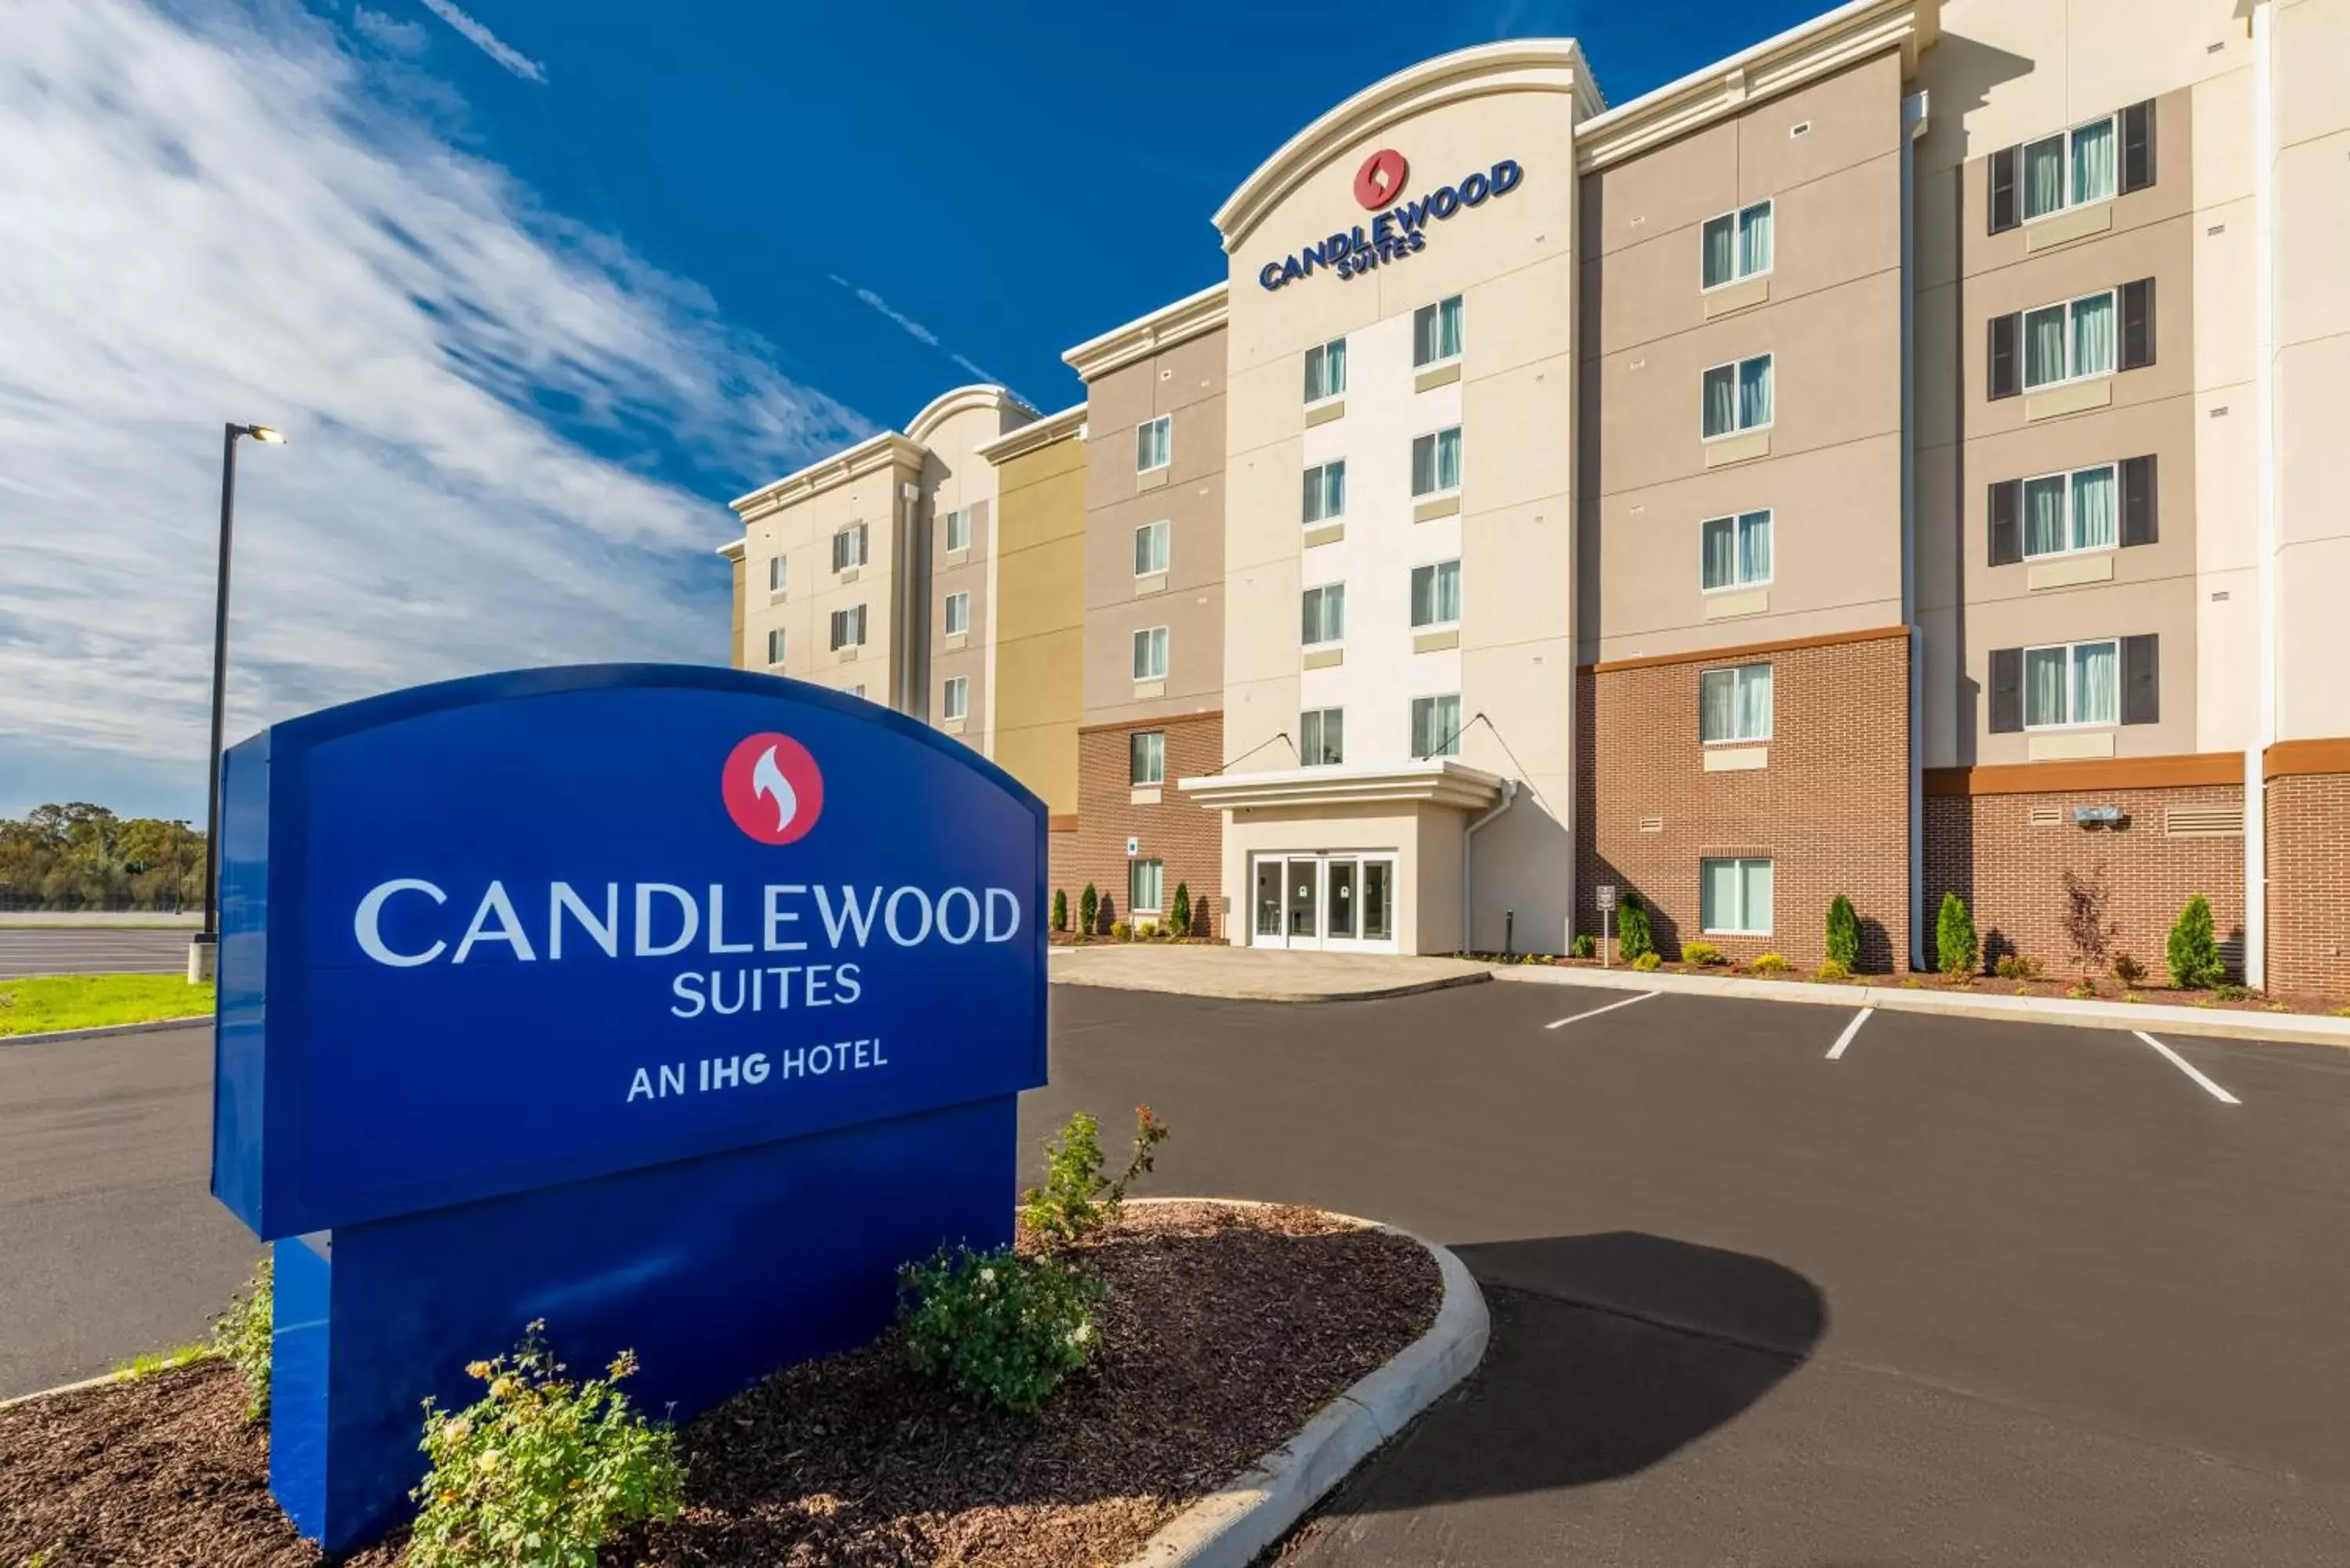 Property building in Candlewood Suites Cookeville, an IHG Hotel